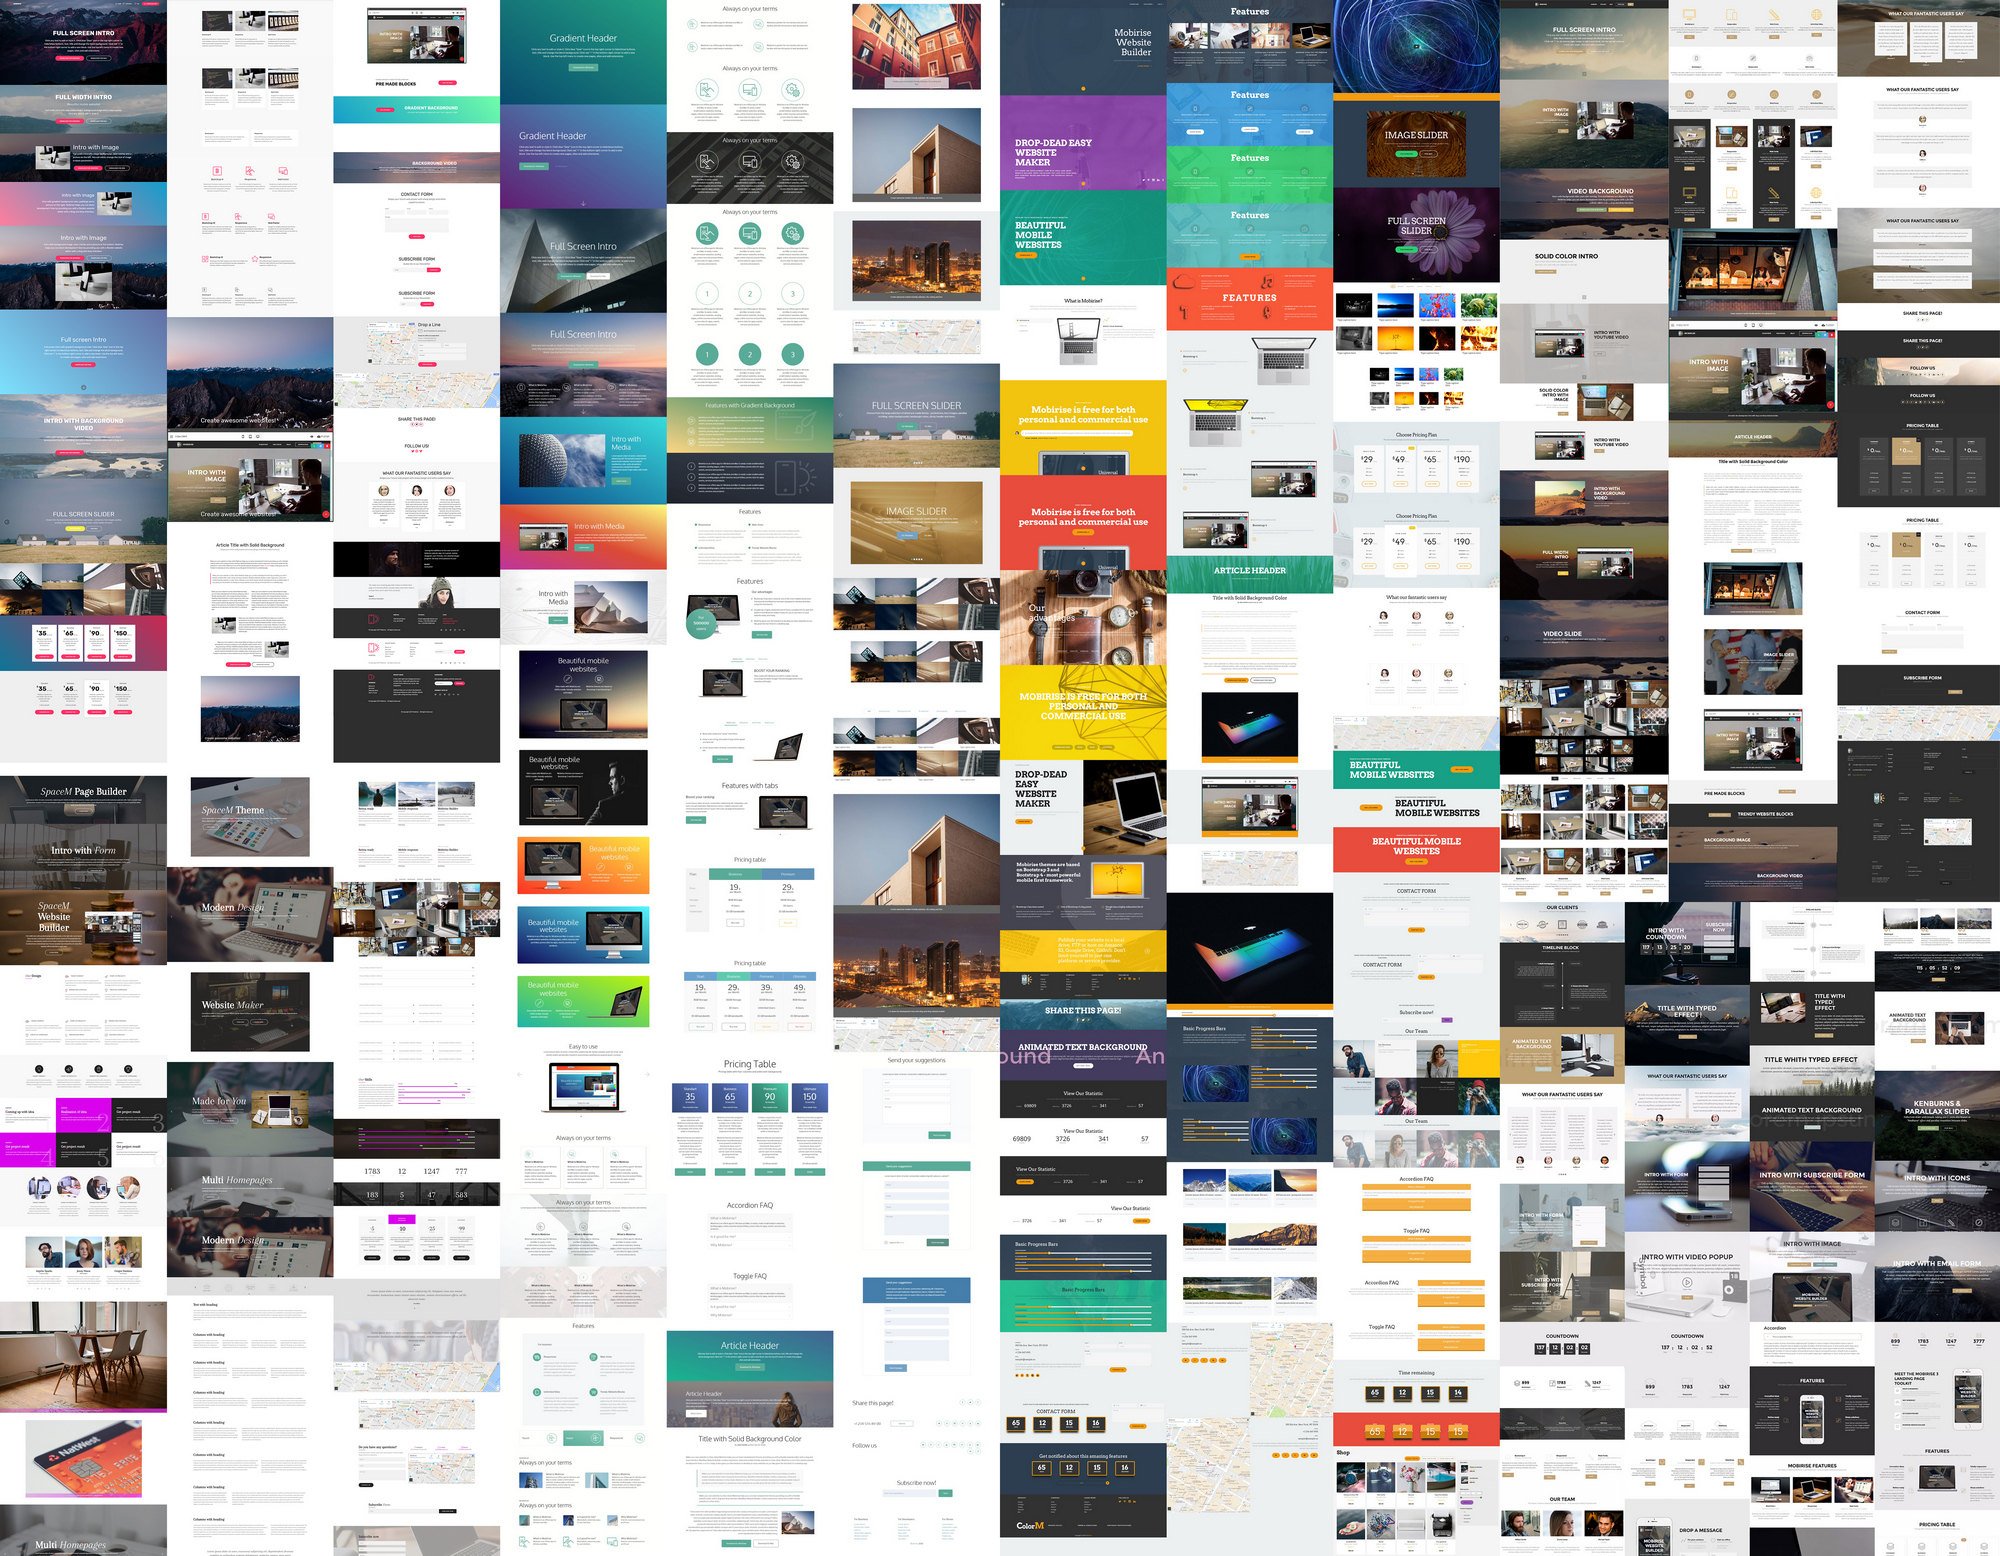 How to create your own website for free? Use the collection of 400 webpage blocks!